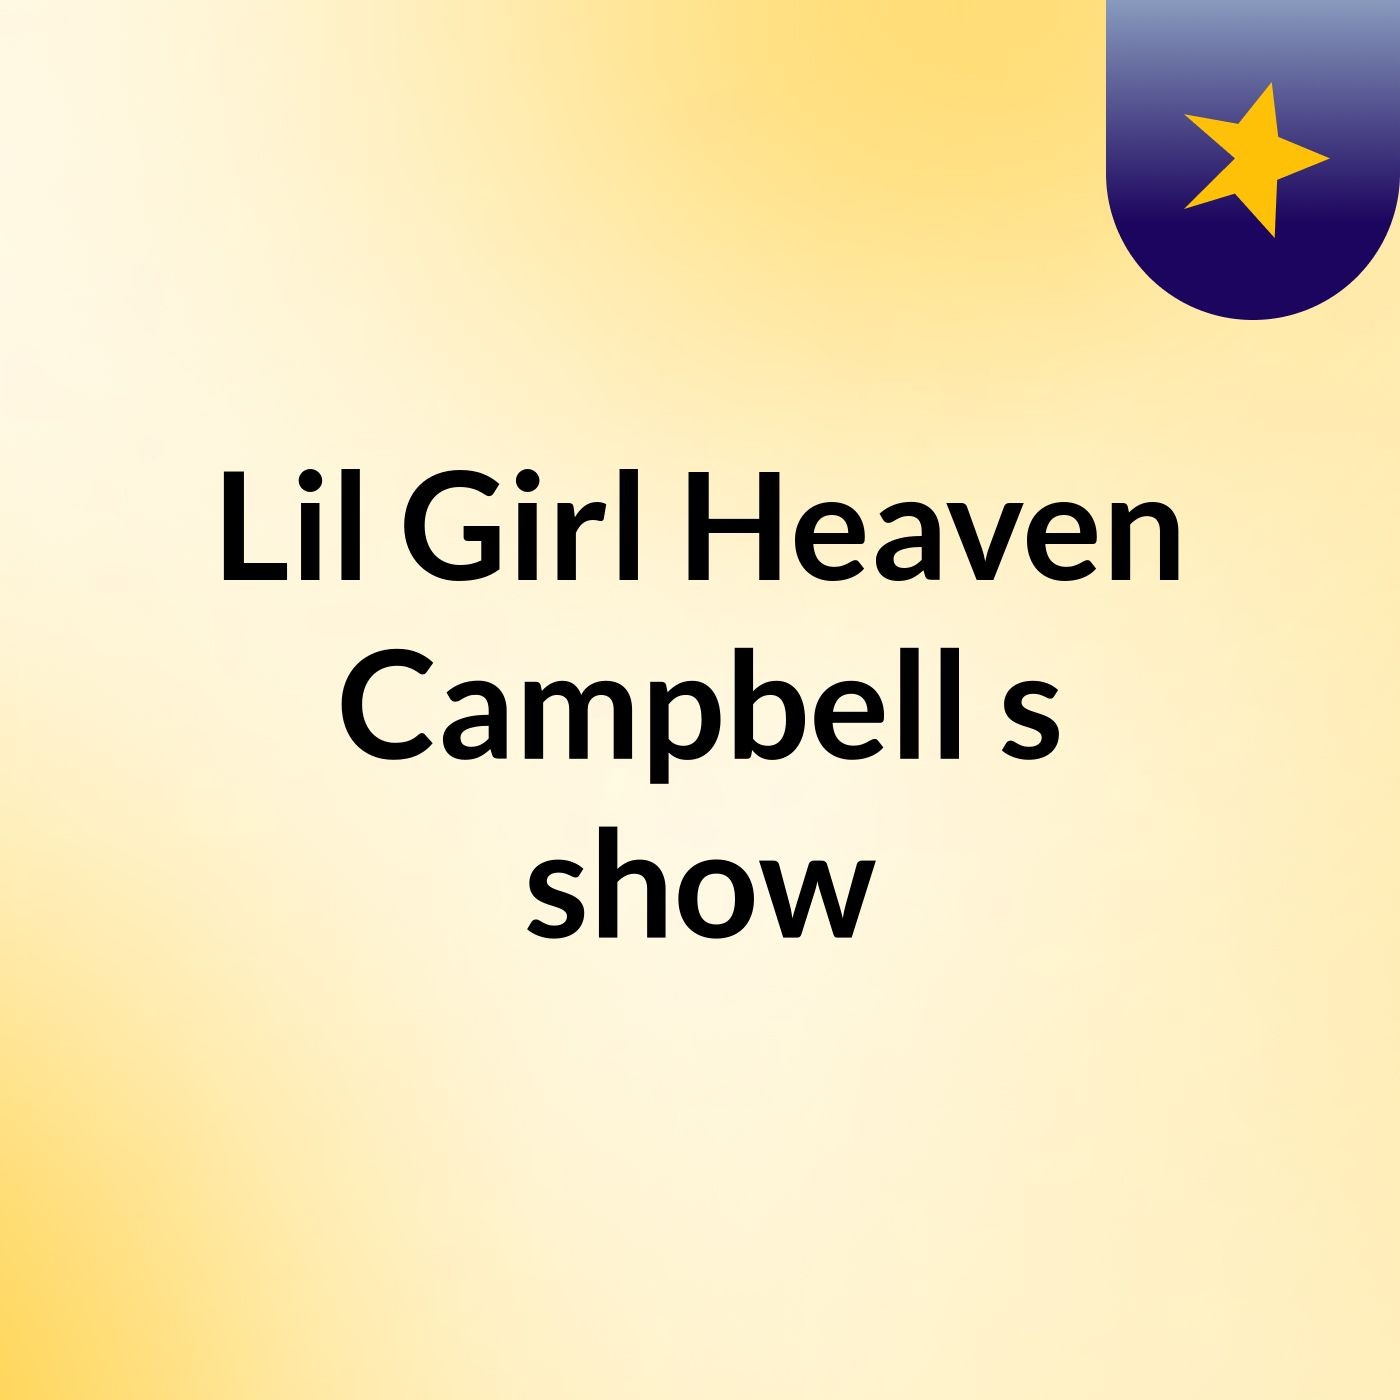 Lil Girl Heaven Campbell's show